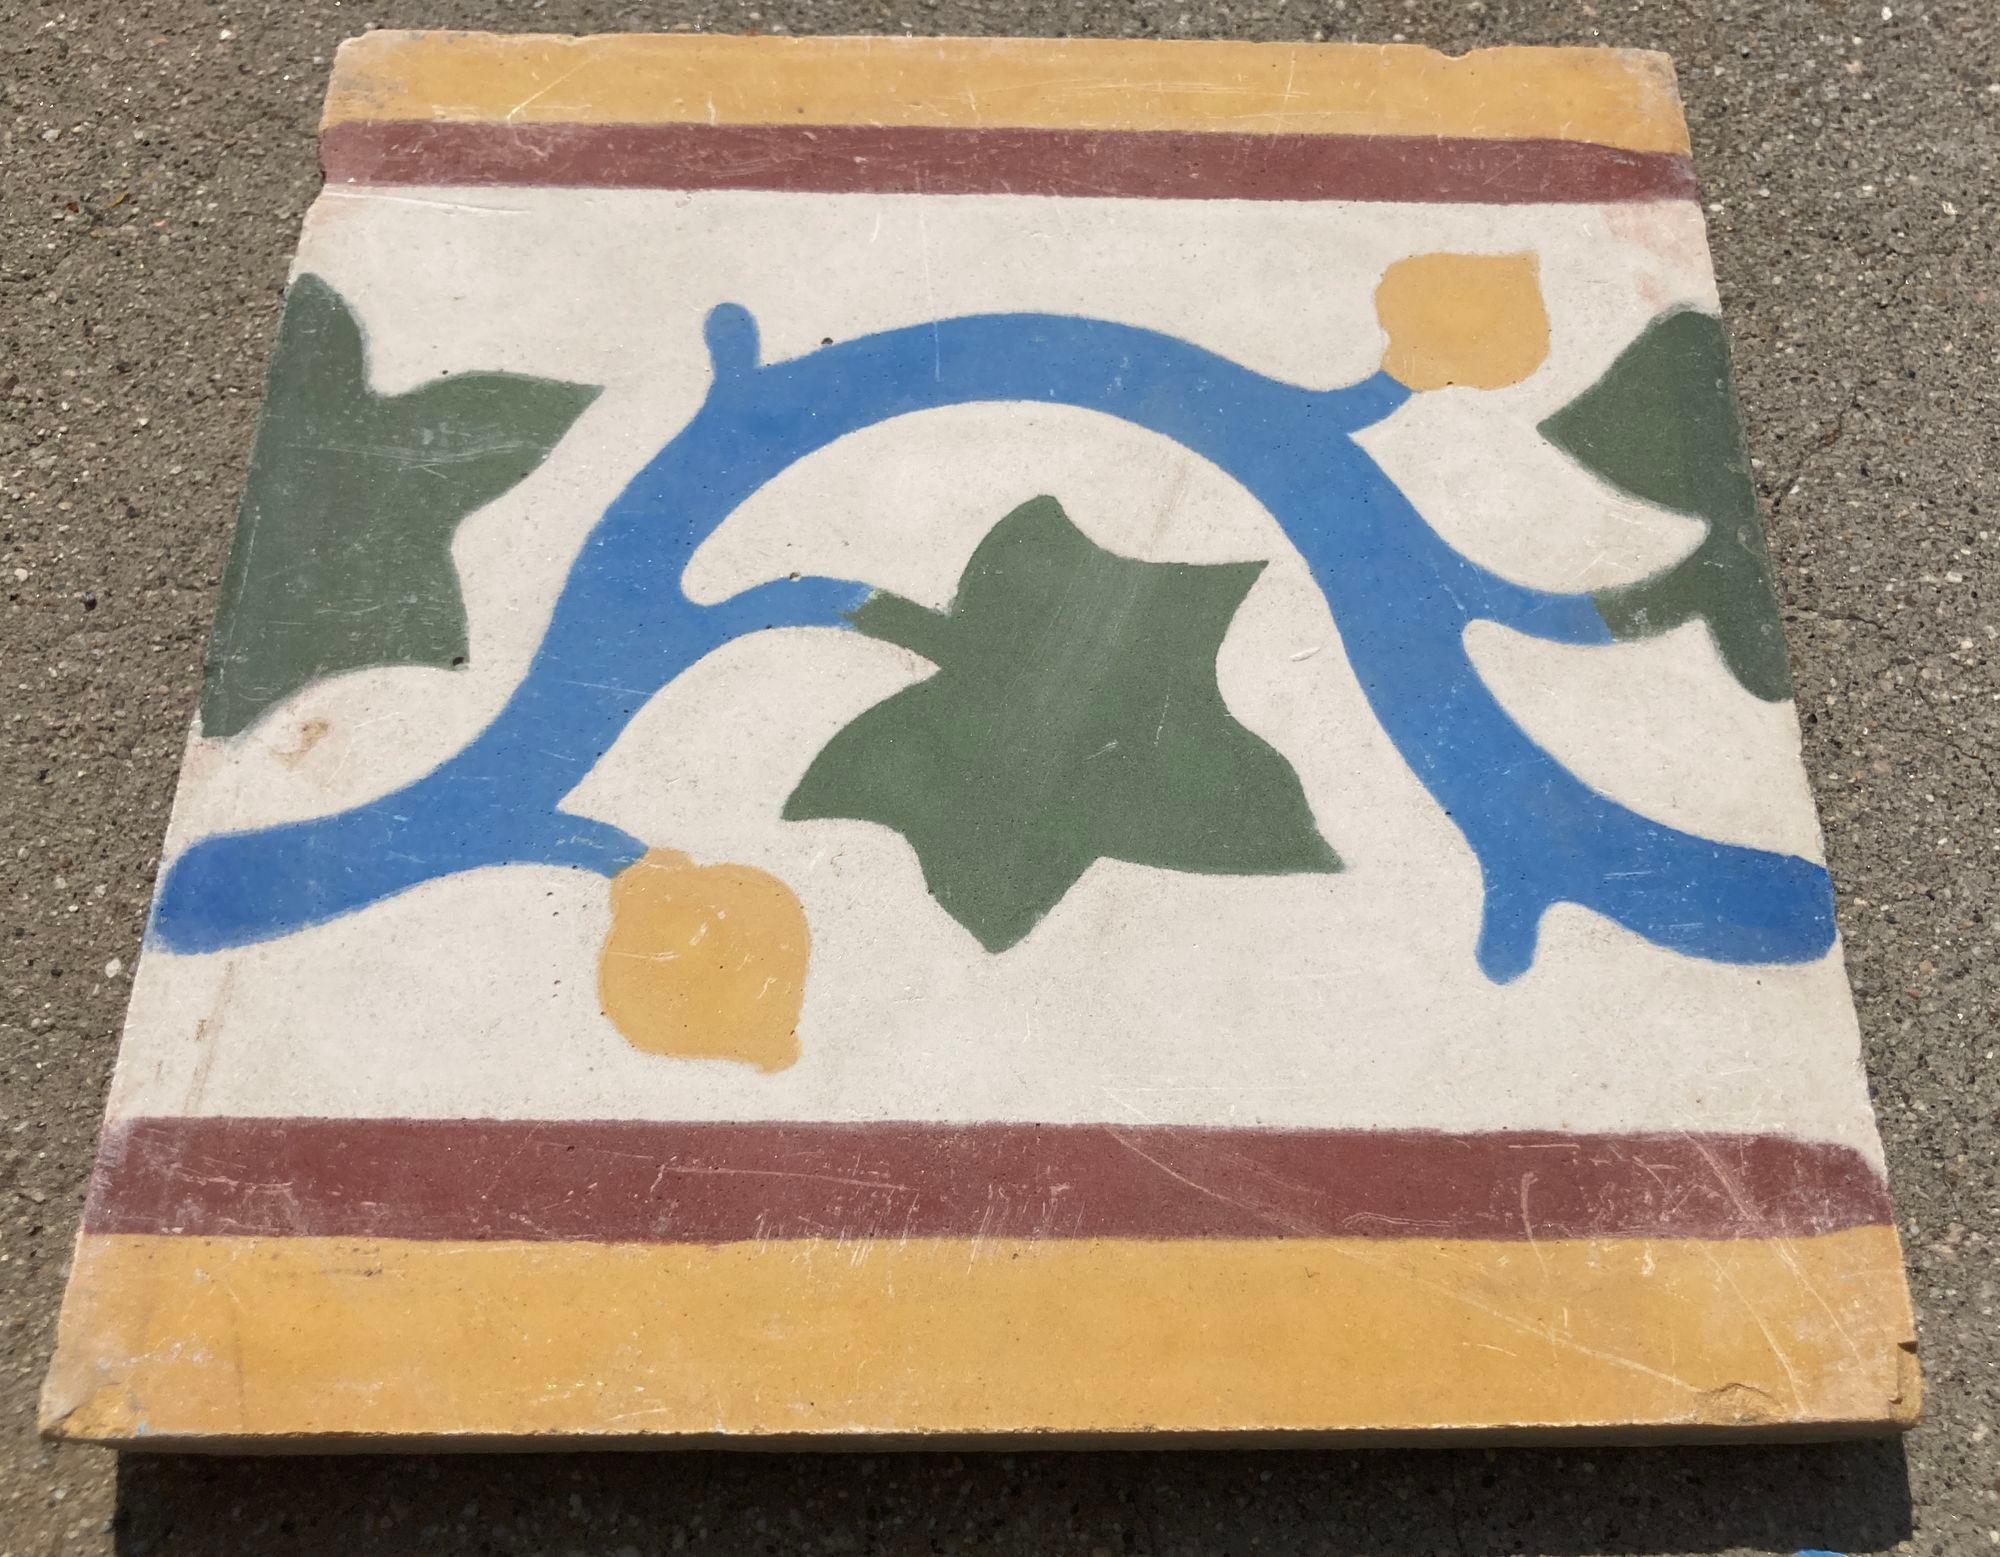 Moroccan Encaustic Cement Tile Border with Moorish Leaf Design Set of 2 In Fair Condition For Sale In North Hollywood, CA